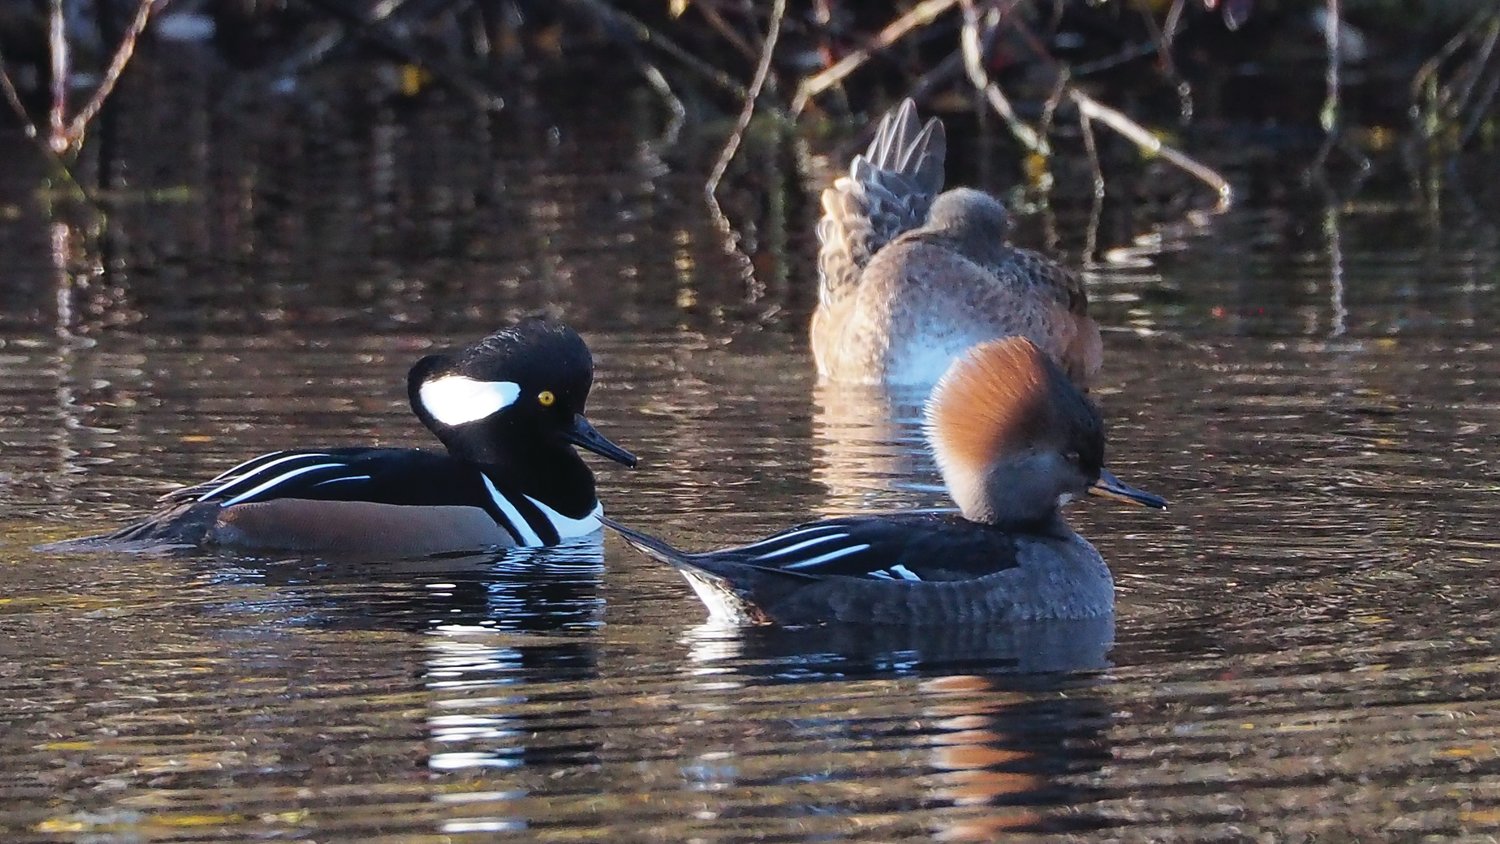 Kah Tai Lagoon provides important habitat for many duck species, including these Hooded Mergansers.